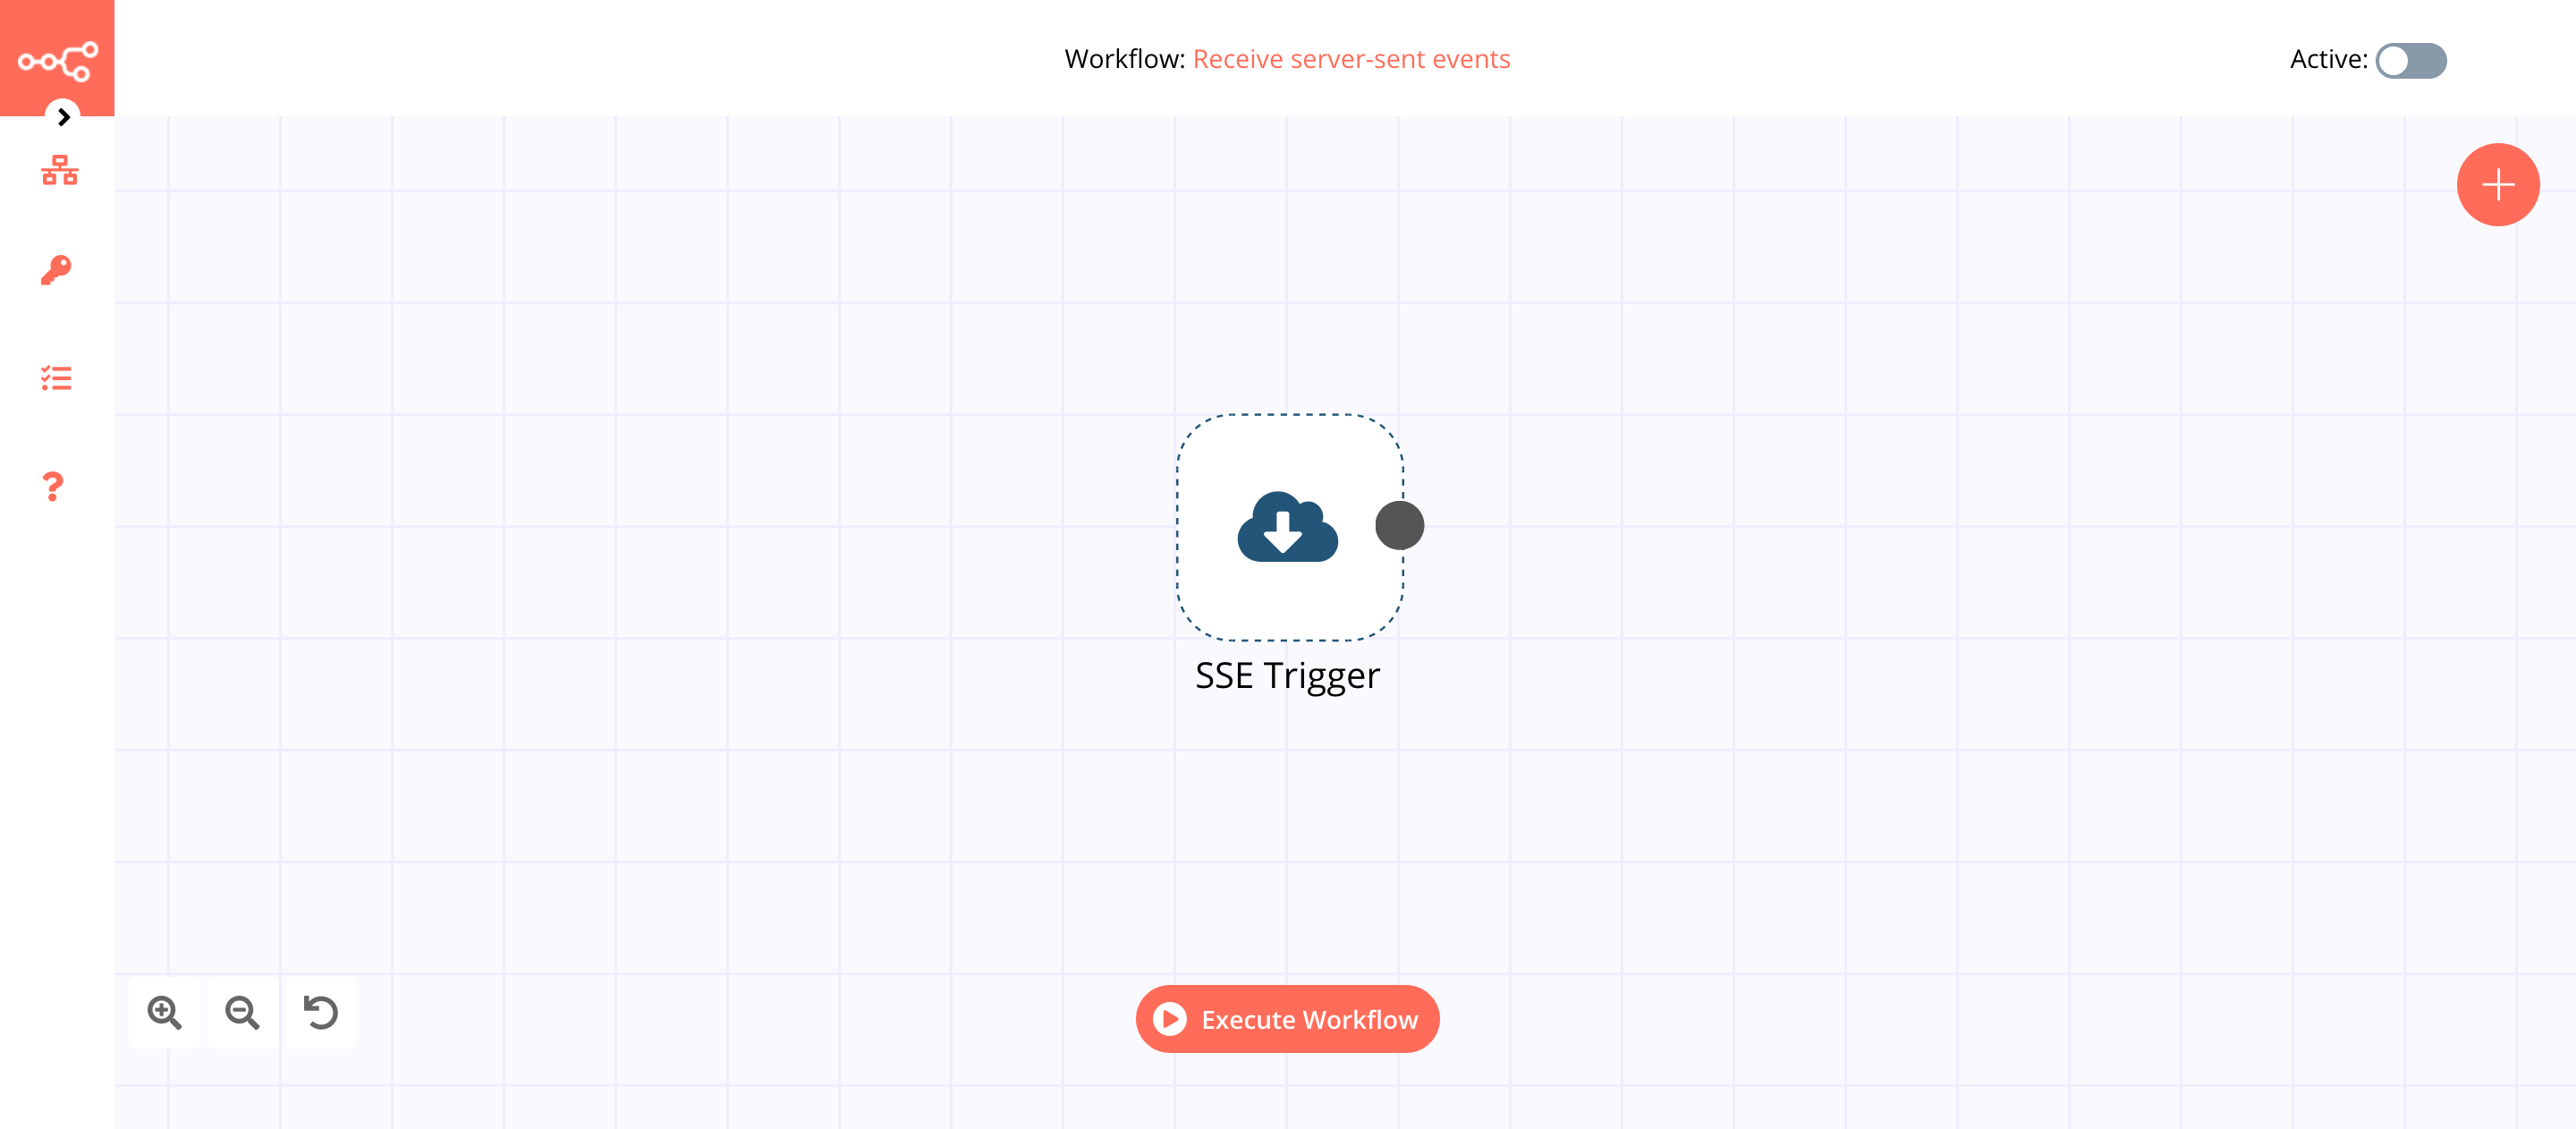 A workflow with the SSE Trigger node